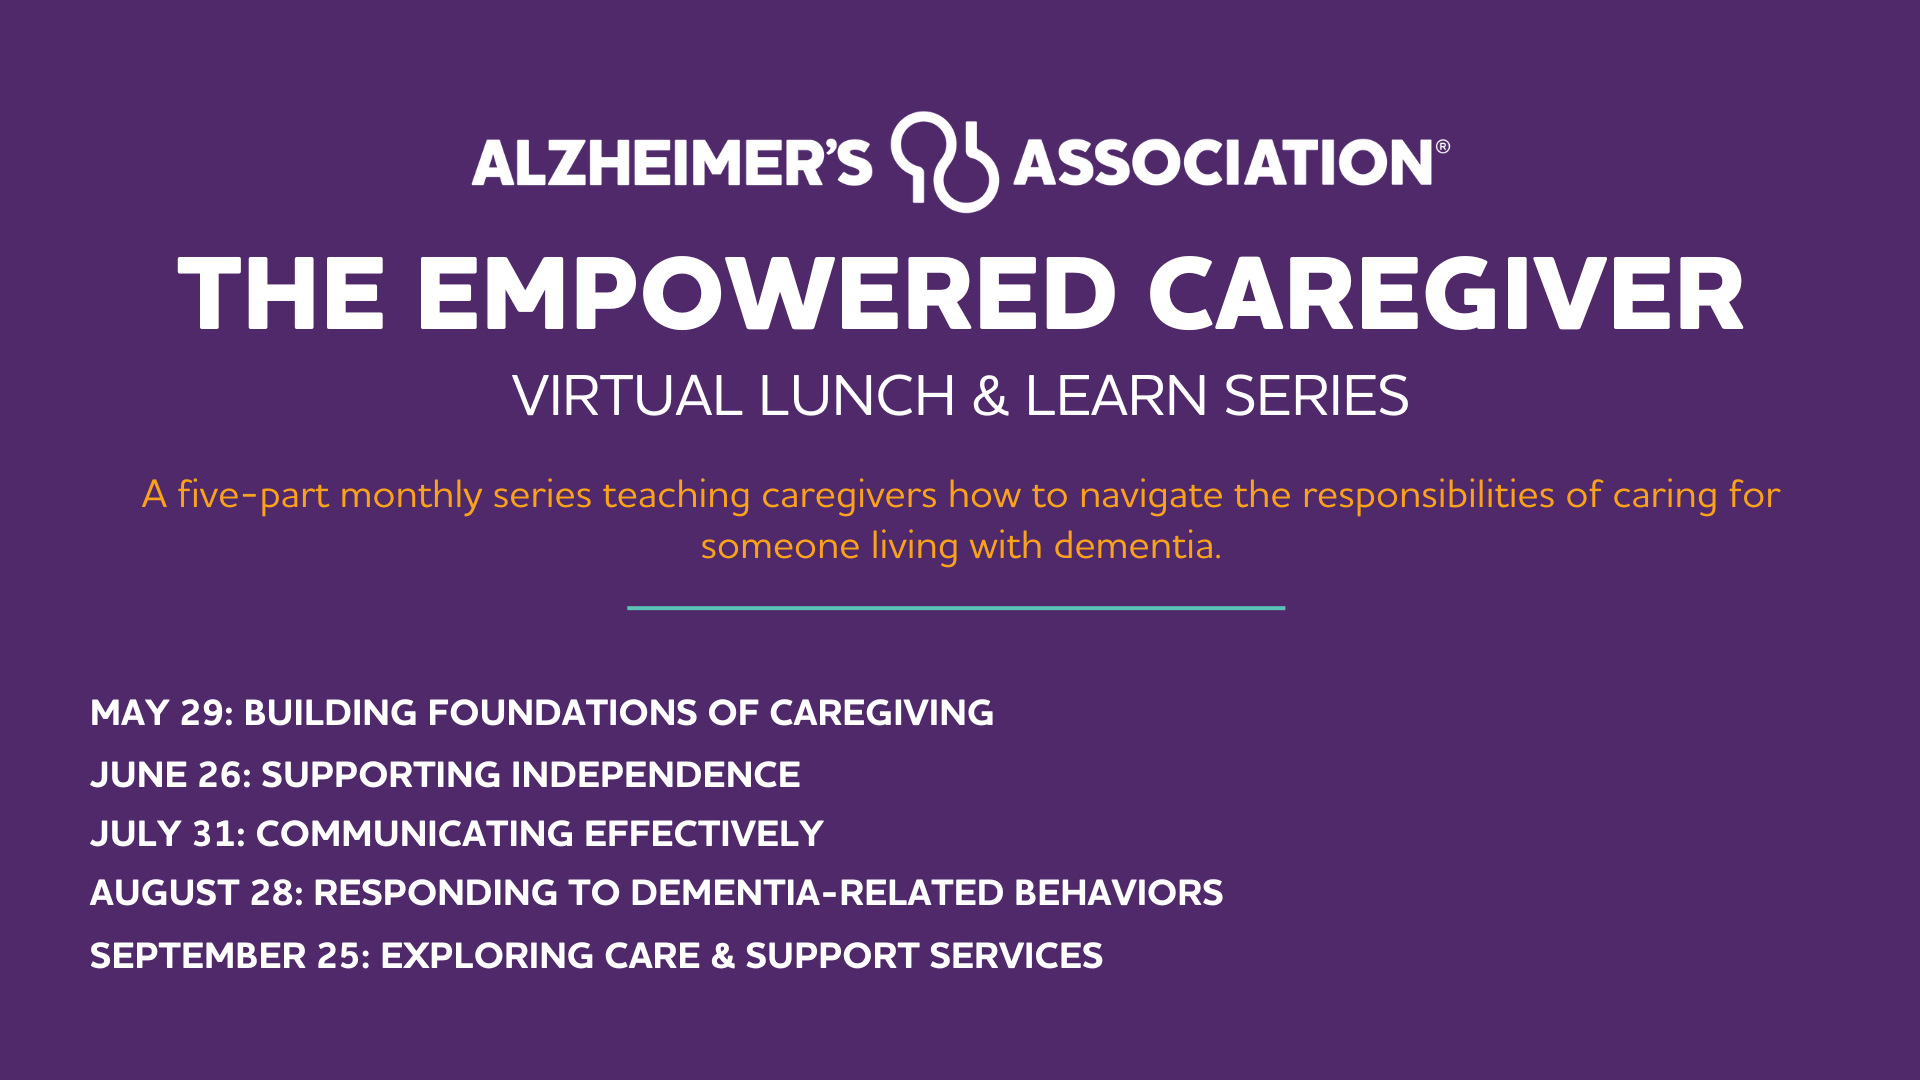 Virtual-Lunch-Learn-Social-Post-THE-EMPOWERED-CAREGIVER-(1920-x-1080-px).png